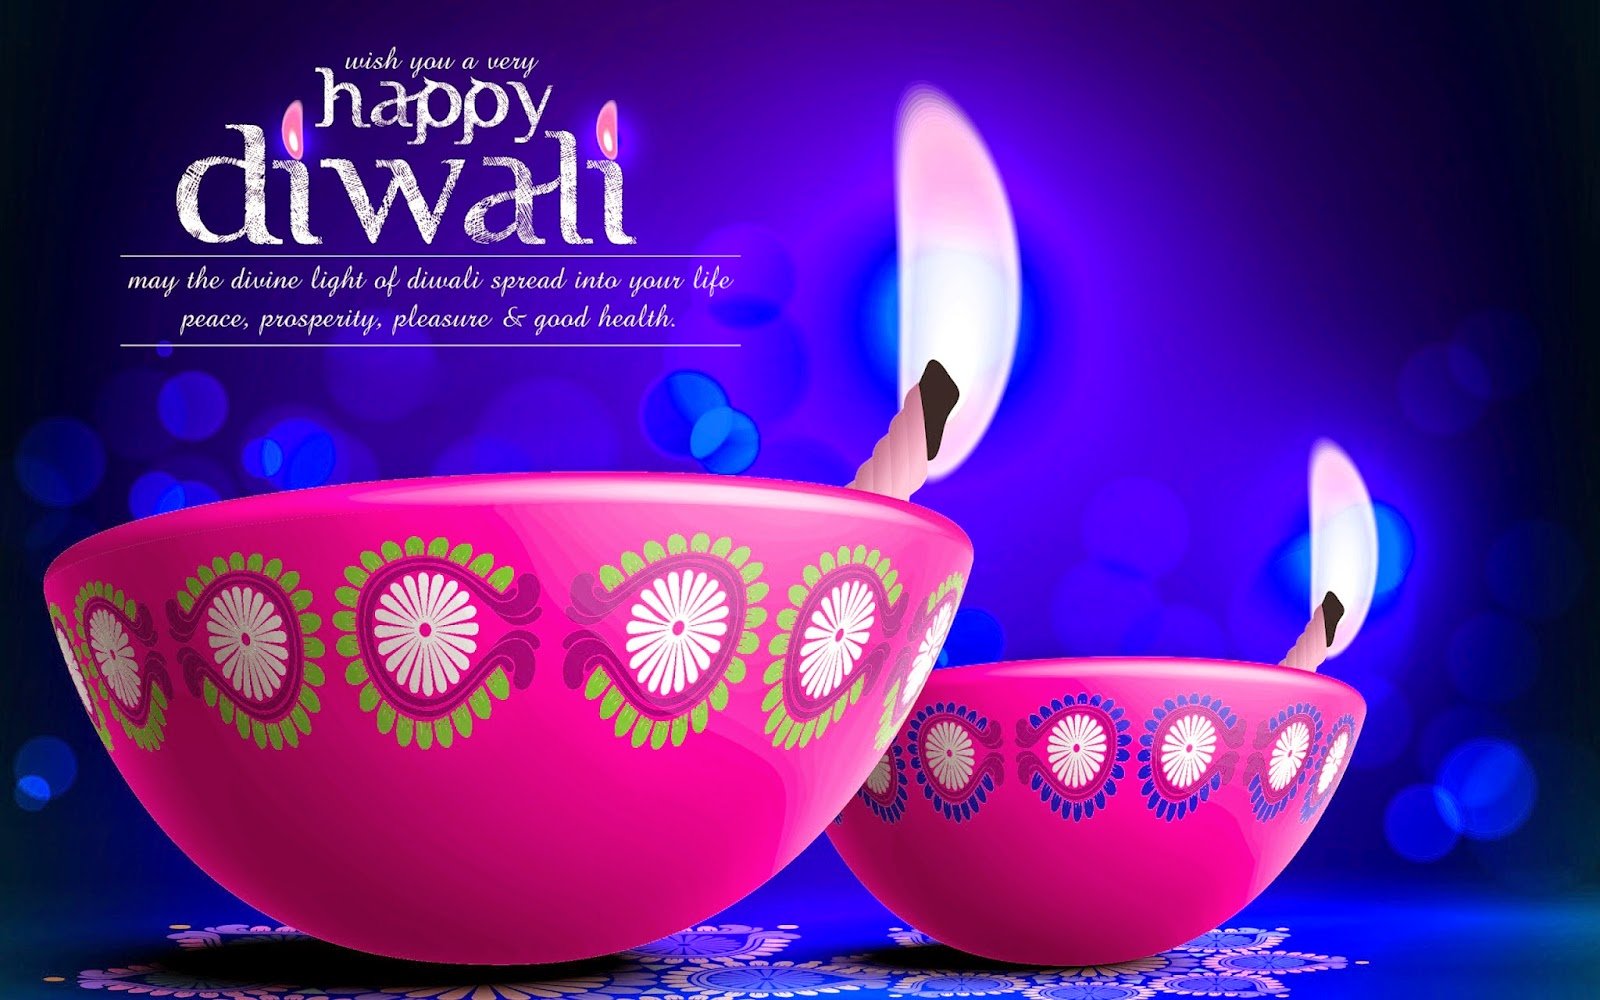 Happy Diwali (Deepavali) 2022: Image, Quotes, Wishes, Messages, Movies